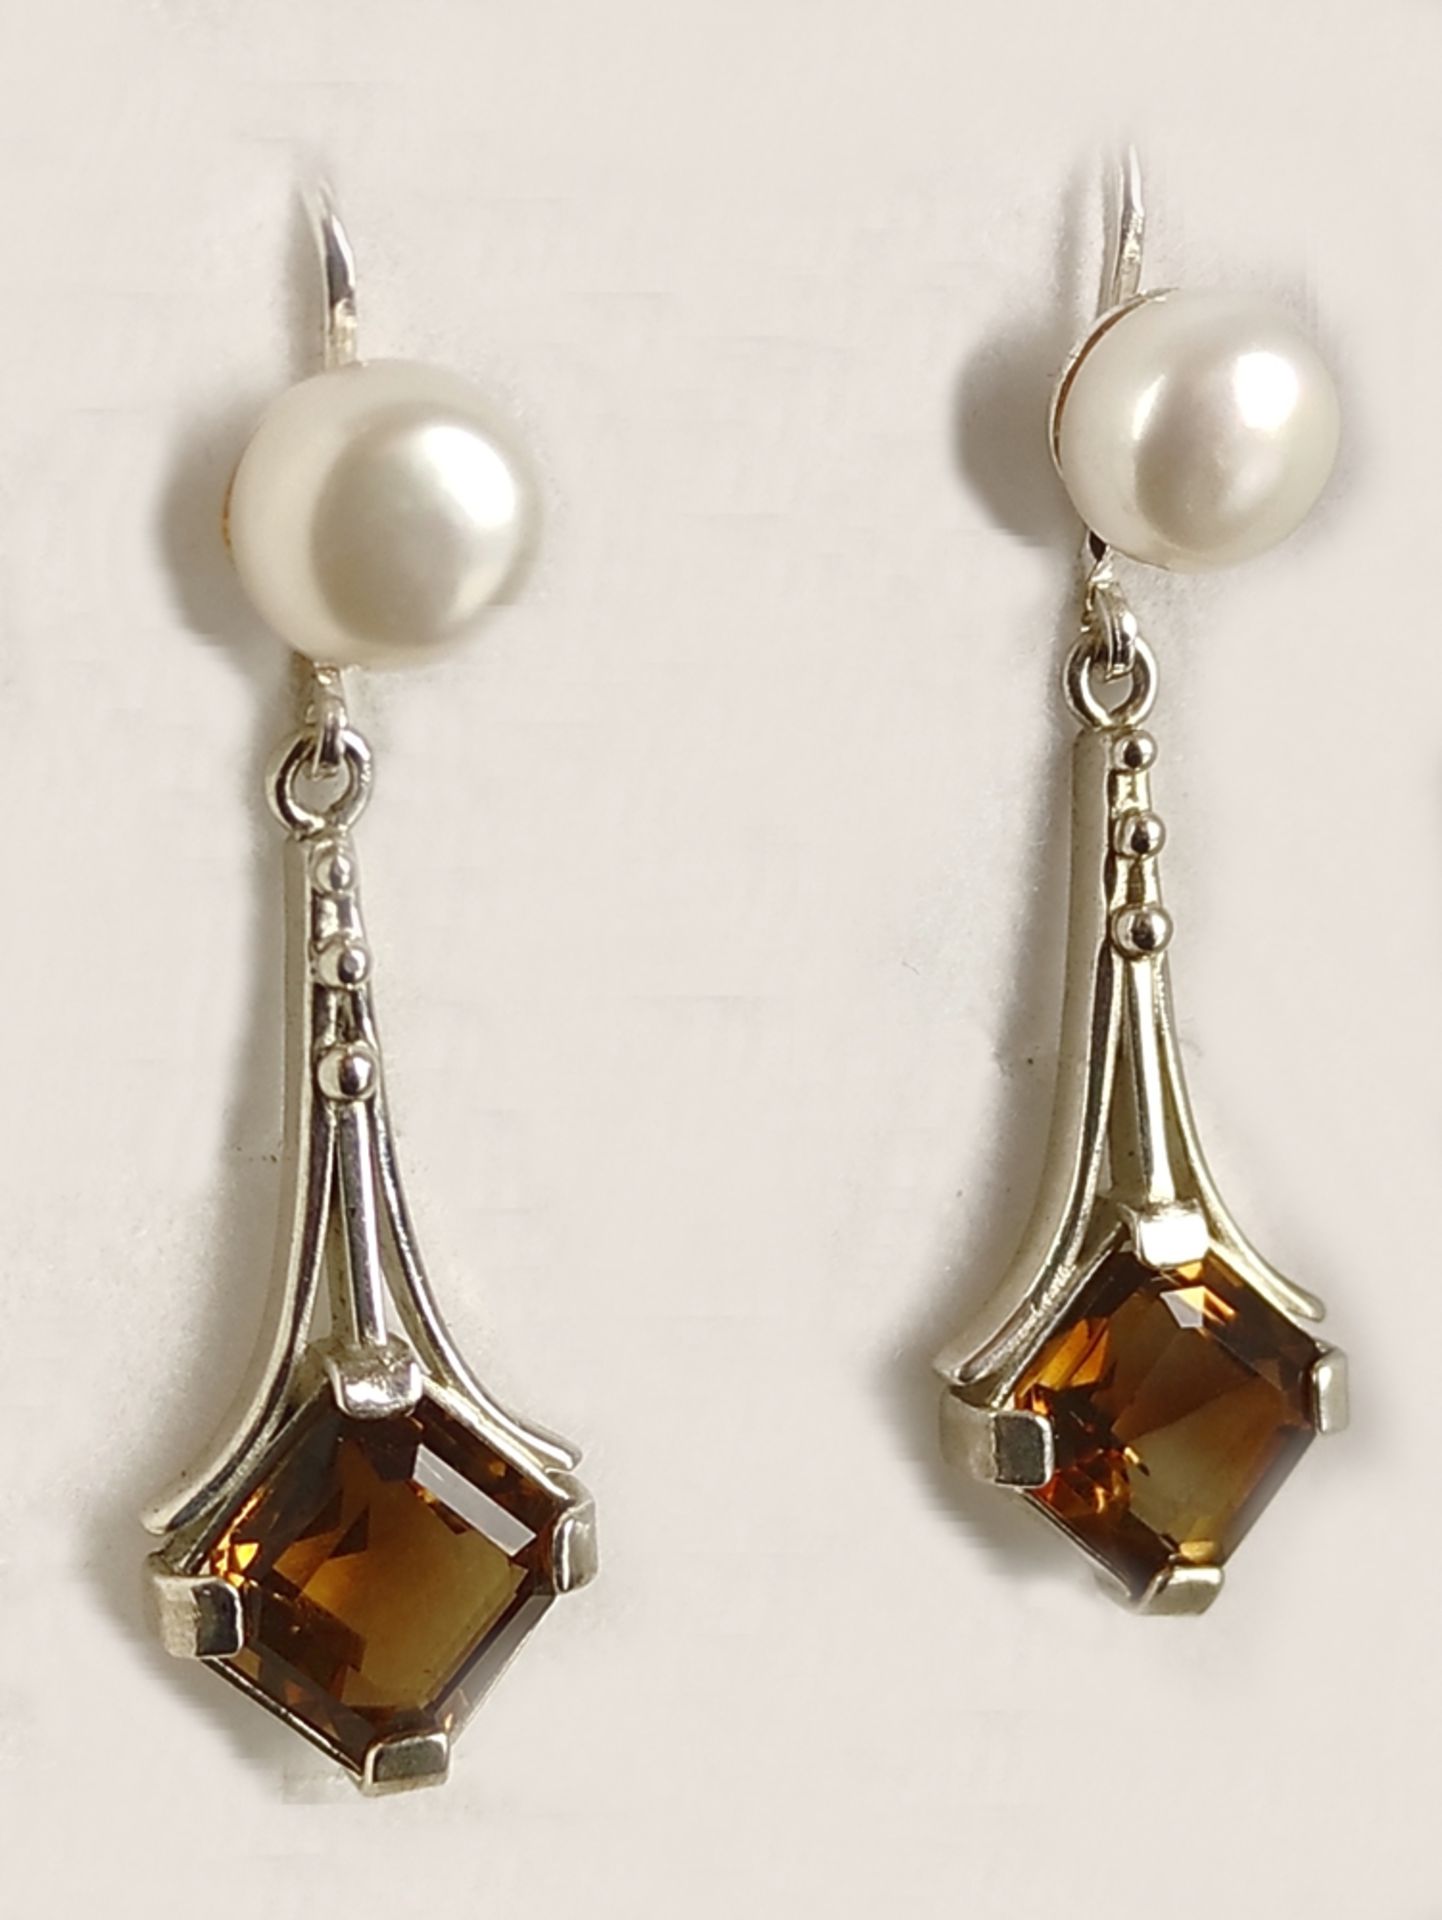 Pair of art deco earrings, hinged earwire set with genuine white cultured pearls in elegant bouton - Image 2 of 3